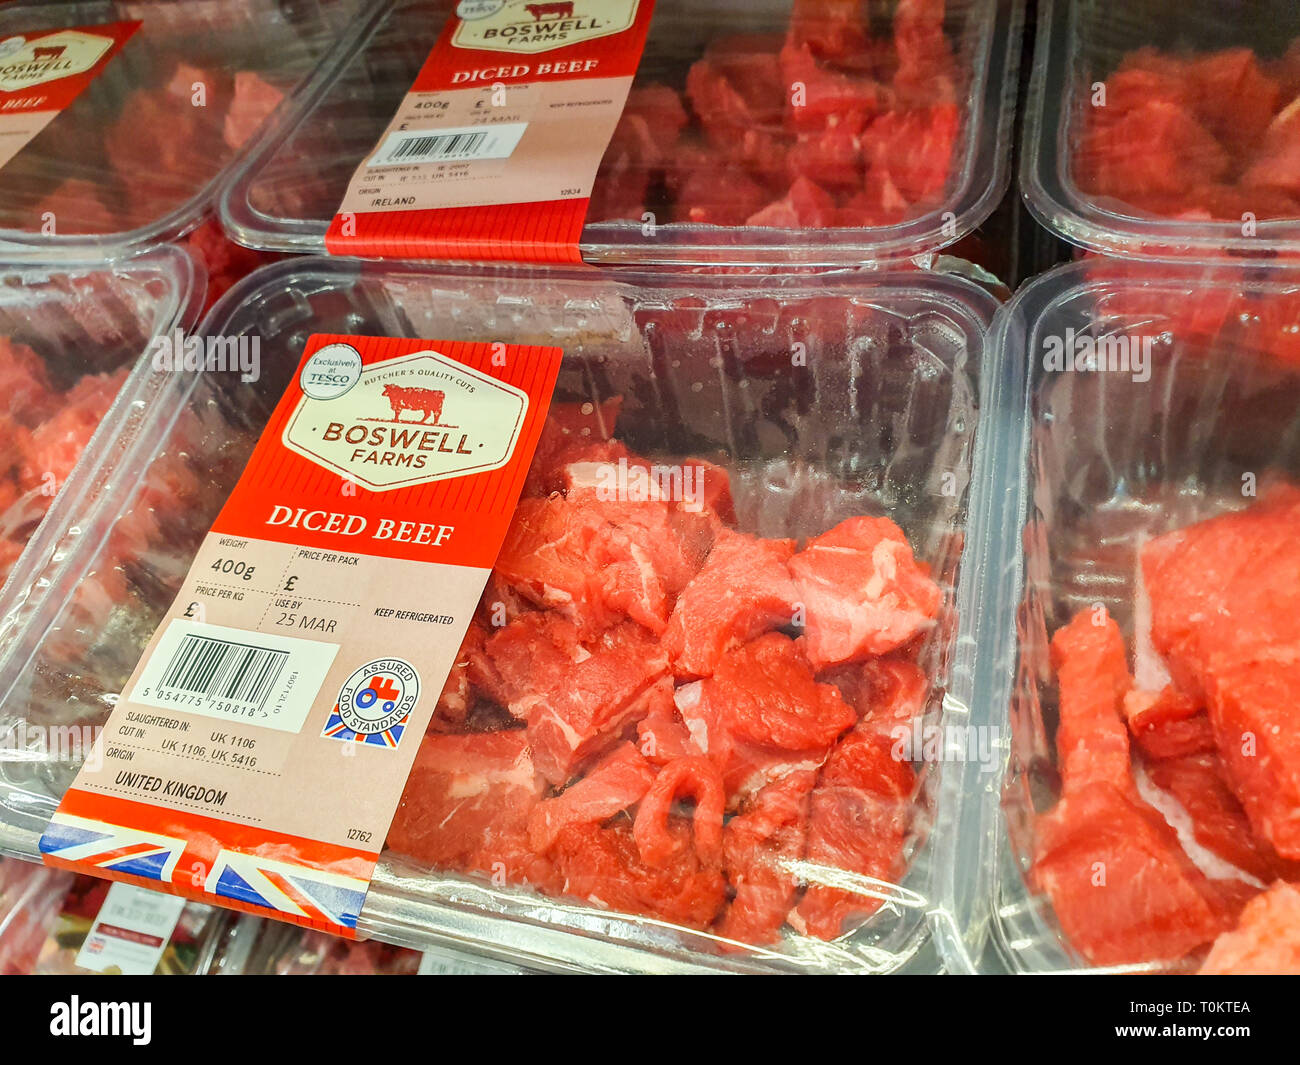 SHEFFIELD, UK - 20TH MARCH 2019: Boswell Farms diced beef for sale inside a Tesco supermarket in Sheffield, UK Stock Photo